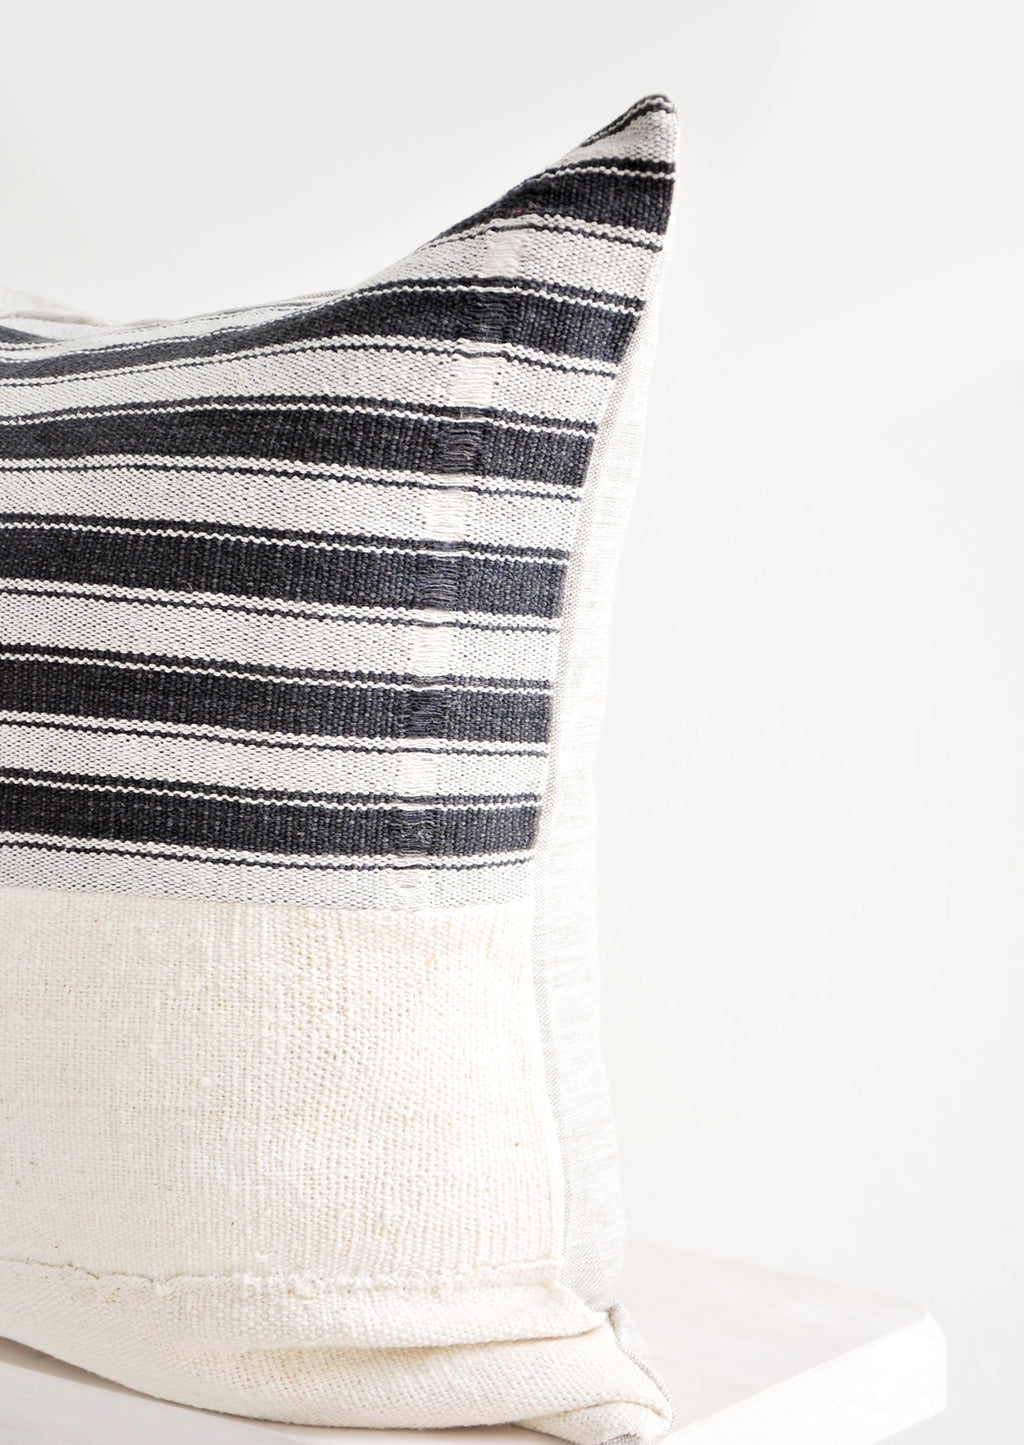 2: Square throw pillow with white and black striped top half and plain mudcloth bottom half